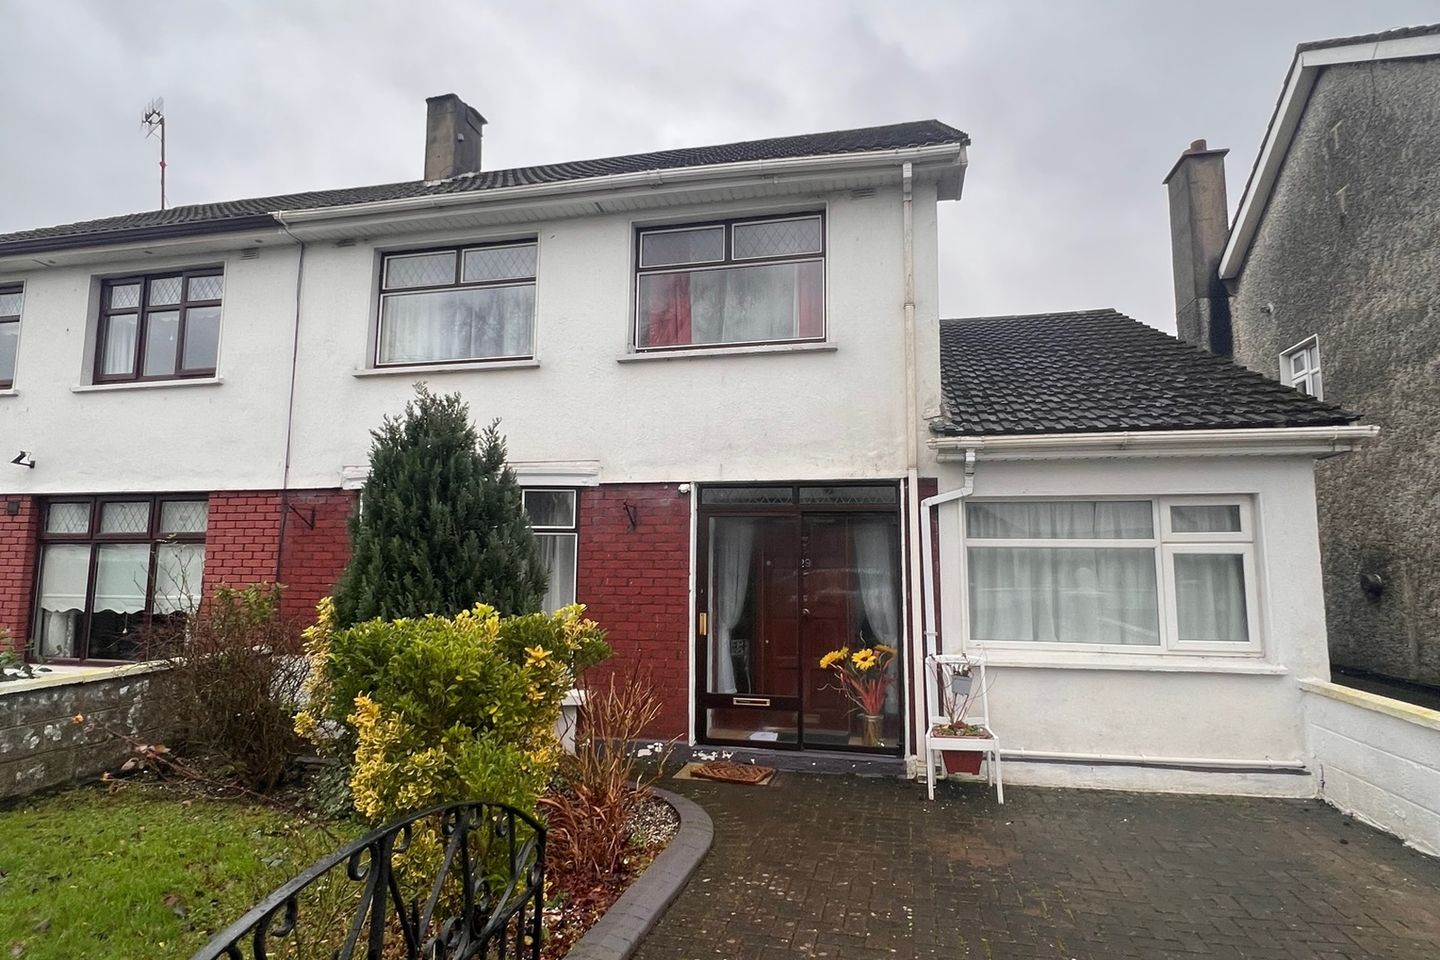 29 Hillview, Drogheda, Co. Louth